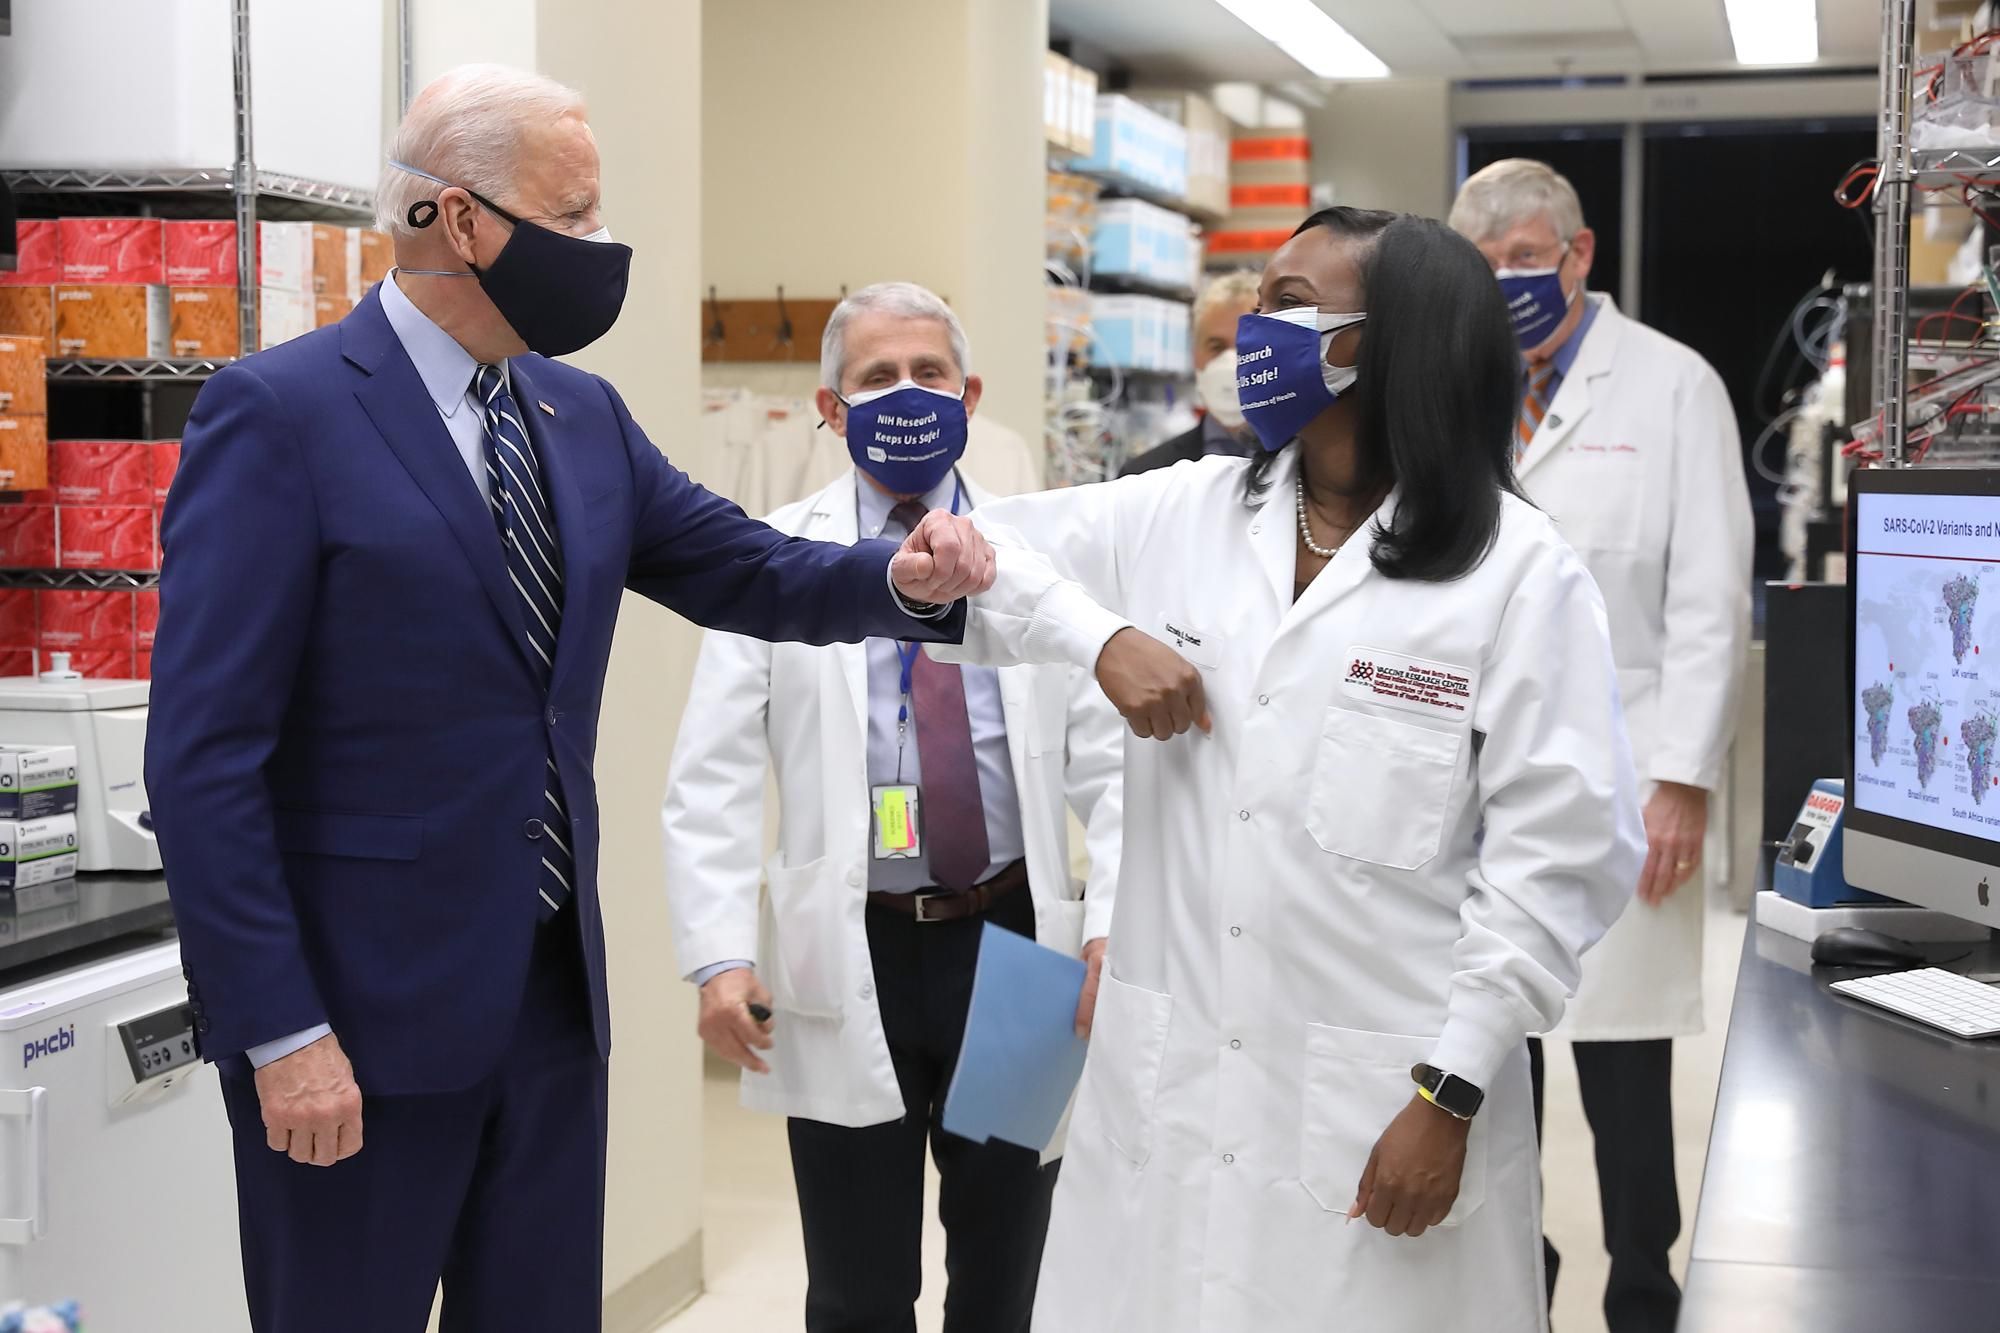 President Biden and Dr. Anthony Fauci visit Corbett in her lab, 2021 